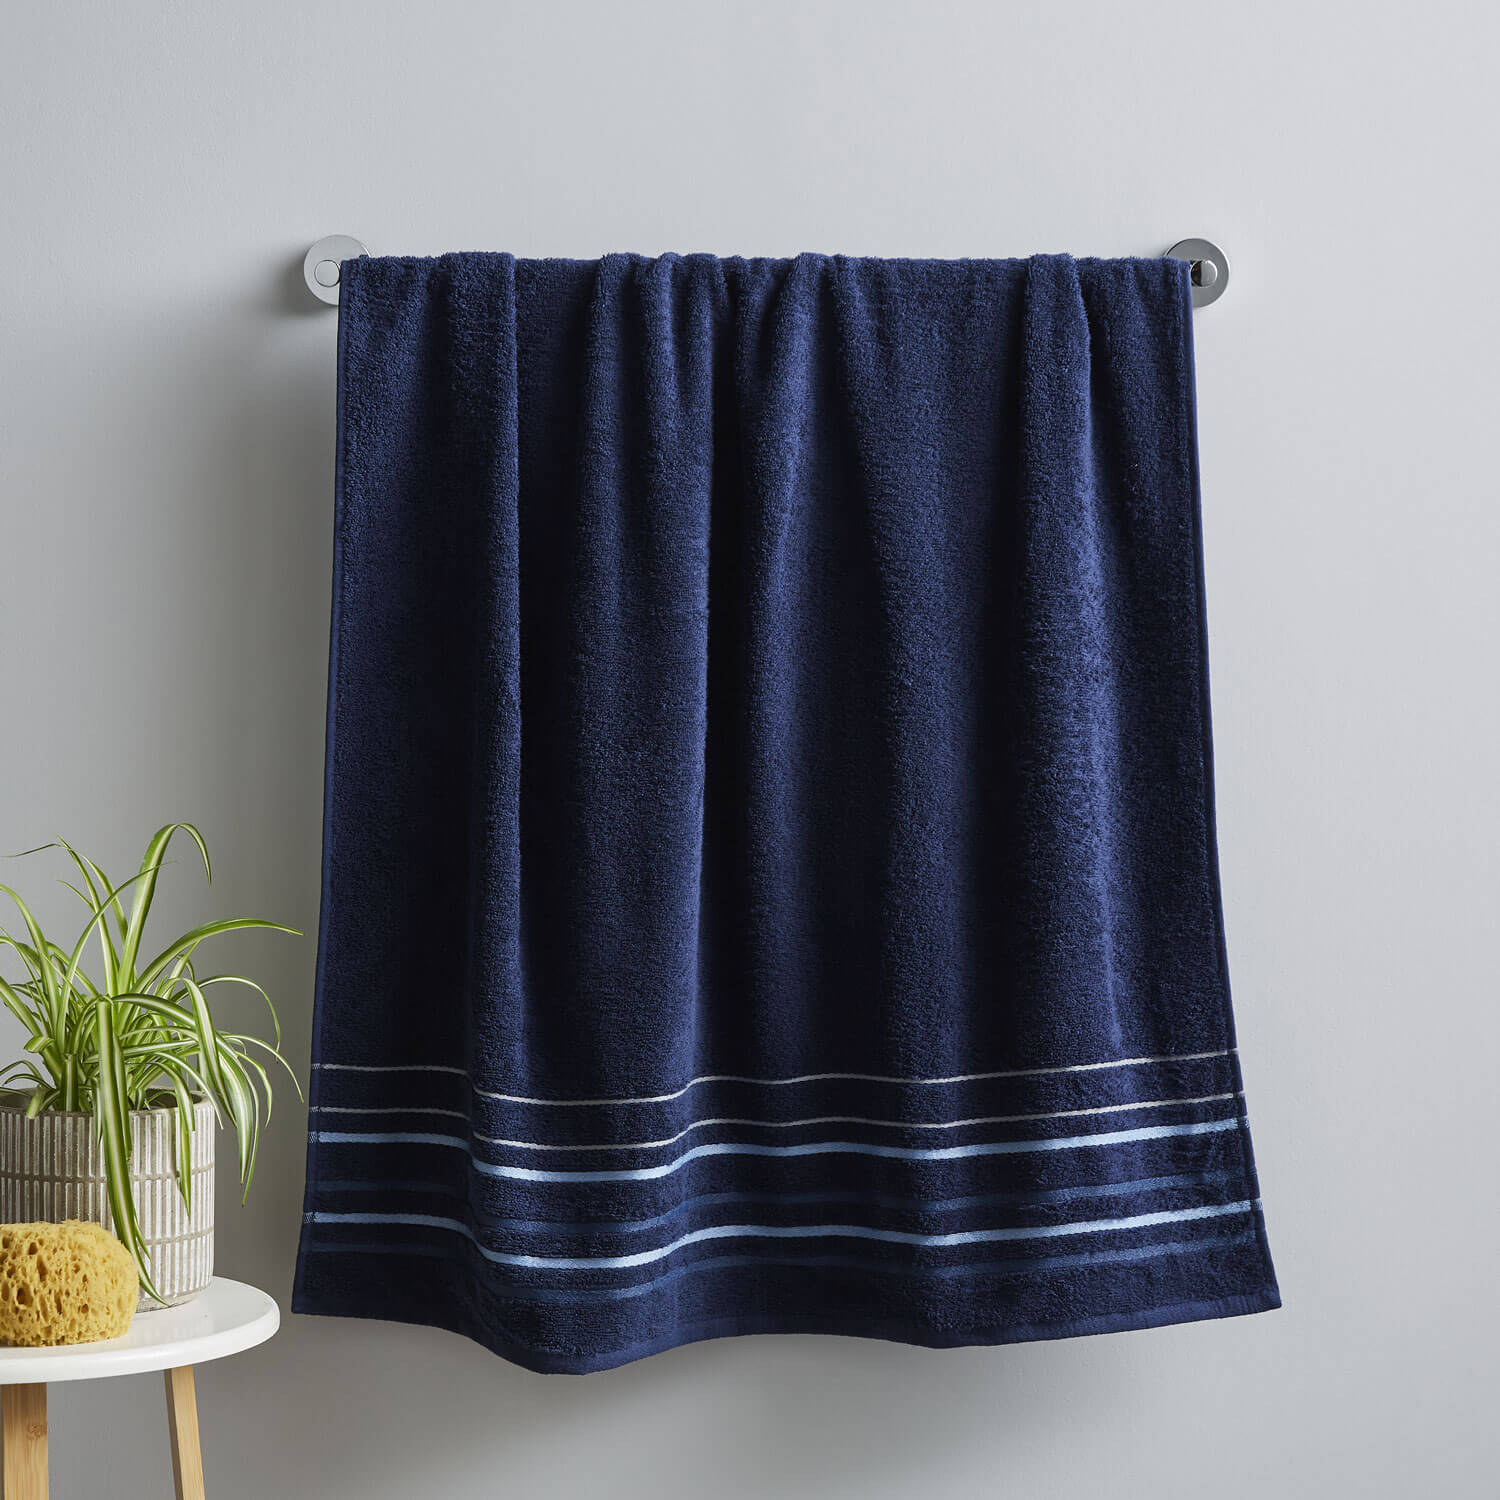 The Home Collection Java Stripe Bath Sheet - Navy 1 Shaws Department Stores